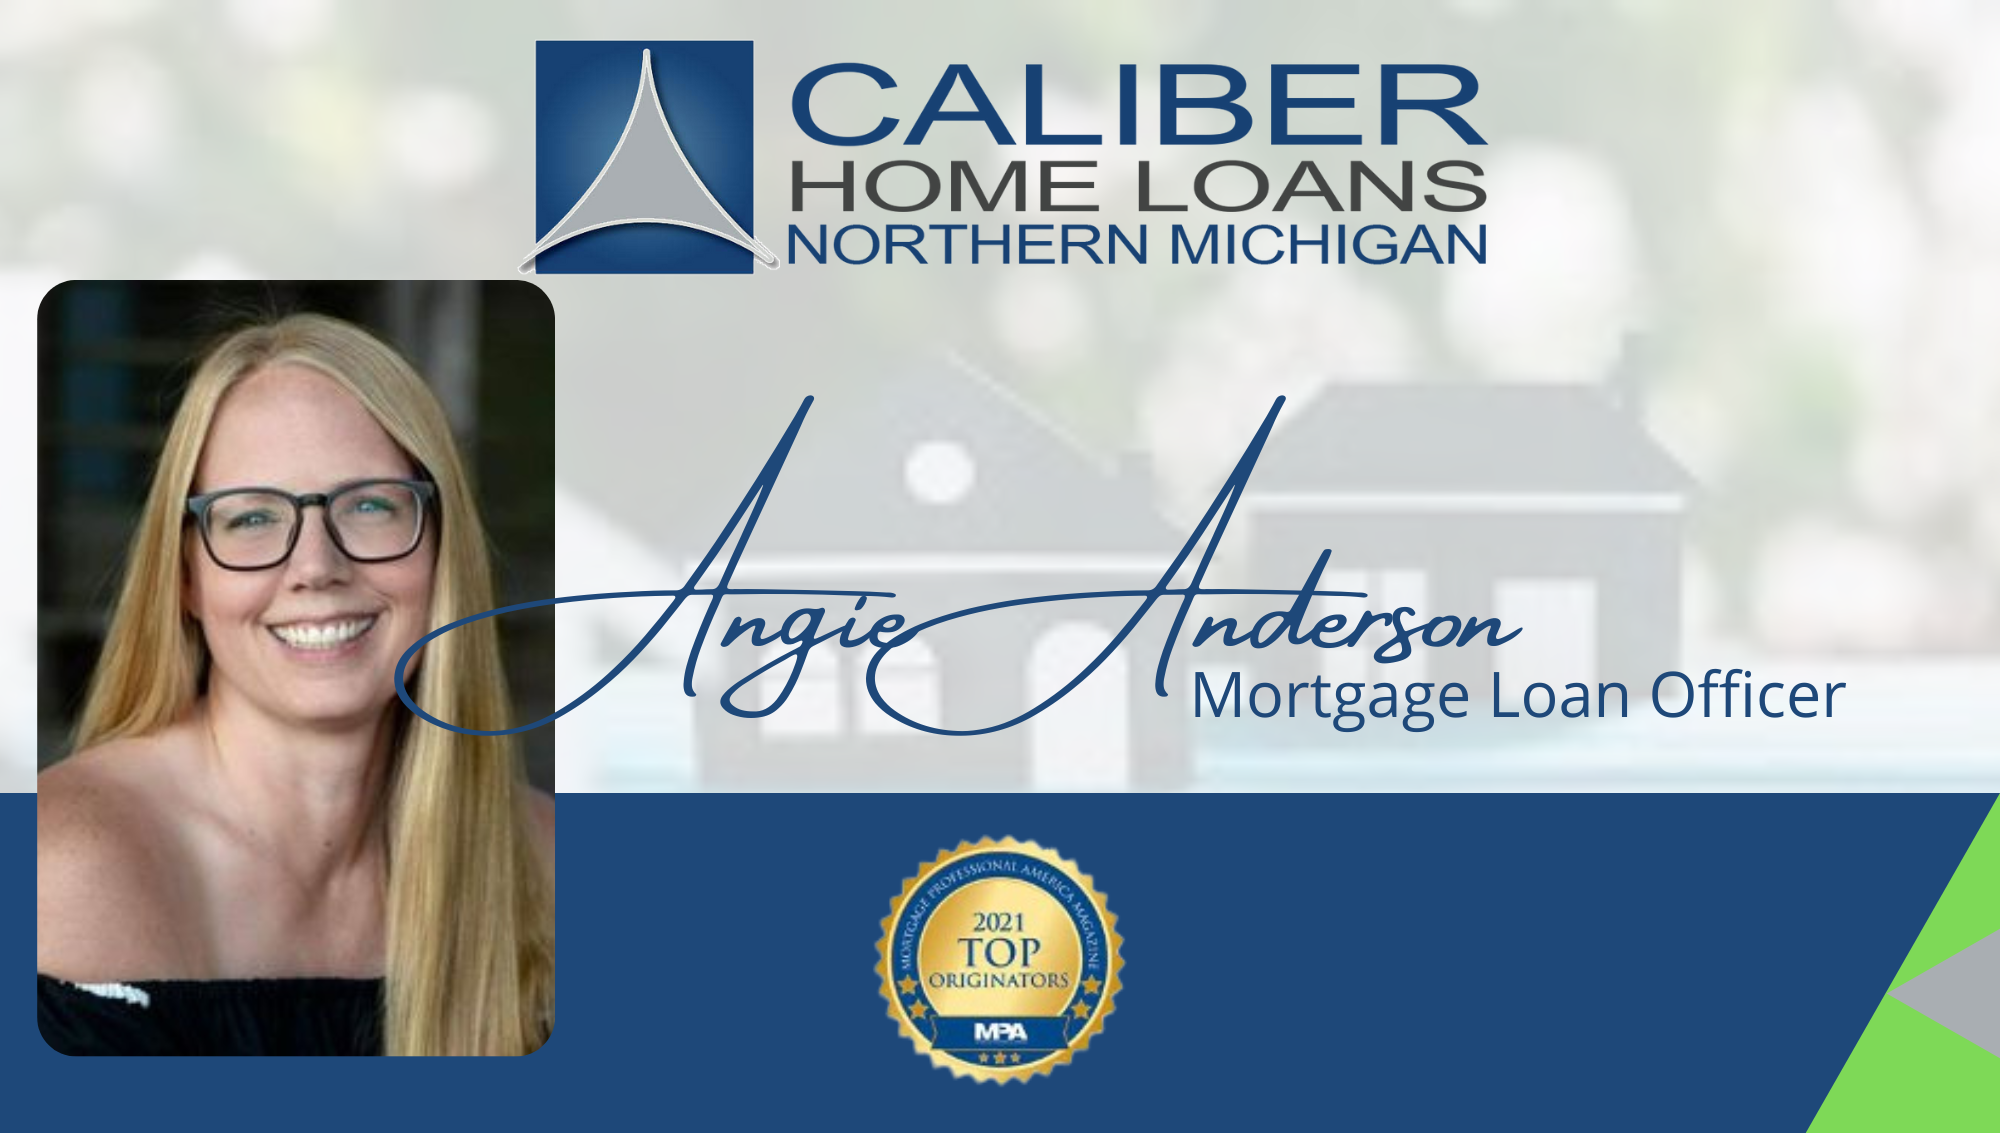 Angie Anderson - Caliber Home Loans. Specializing in Purchase Mortgage Financing, Second Home Mortgage Financing, Vacation Home Mortgage Financing, Investment Property Mortgage Financing, Down Payment Assistance, First Time Homebuyer, Self-Employed Home Buyer, Debt Consolidation. FHA, VA, MSHDA, Conventional, Jumbo, USDA Mortgage Loans. 